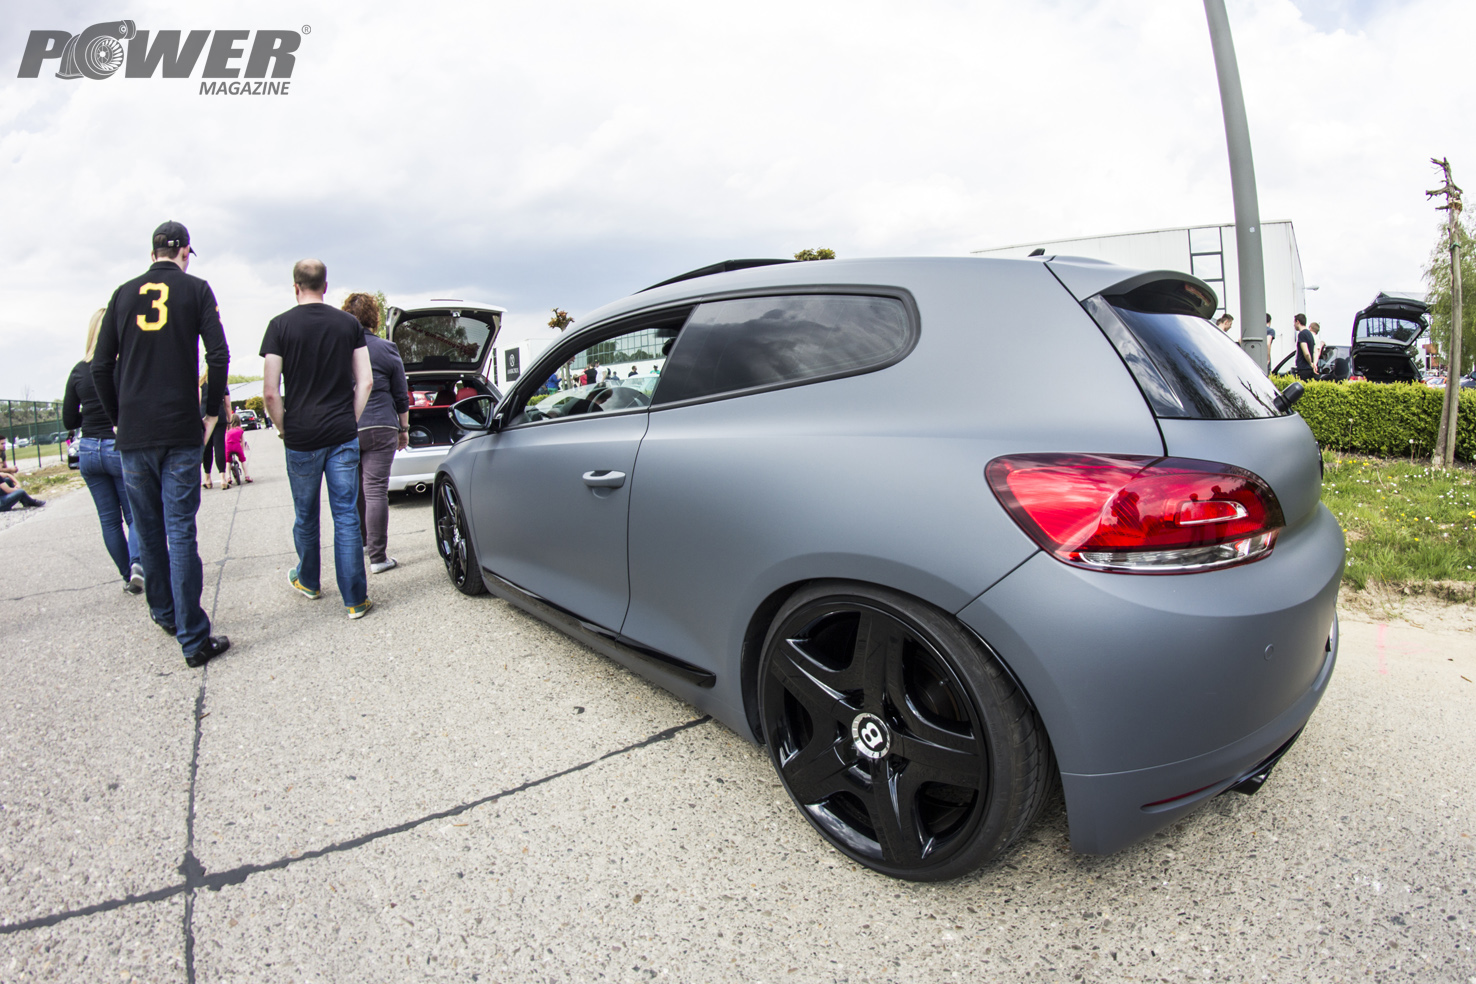 VW Scirocco tuning